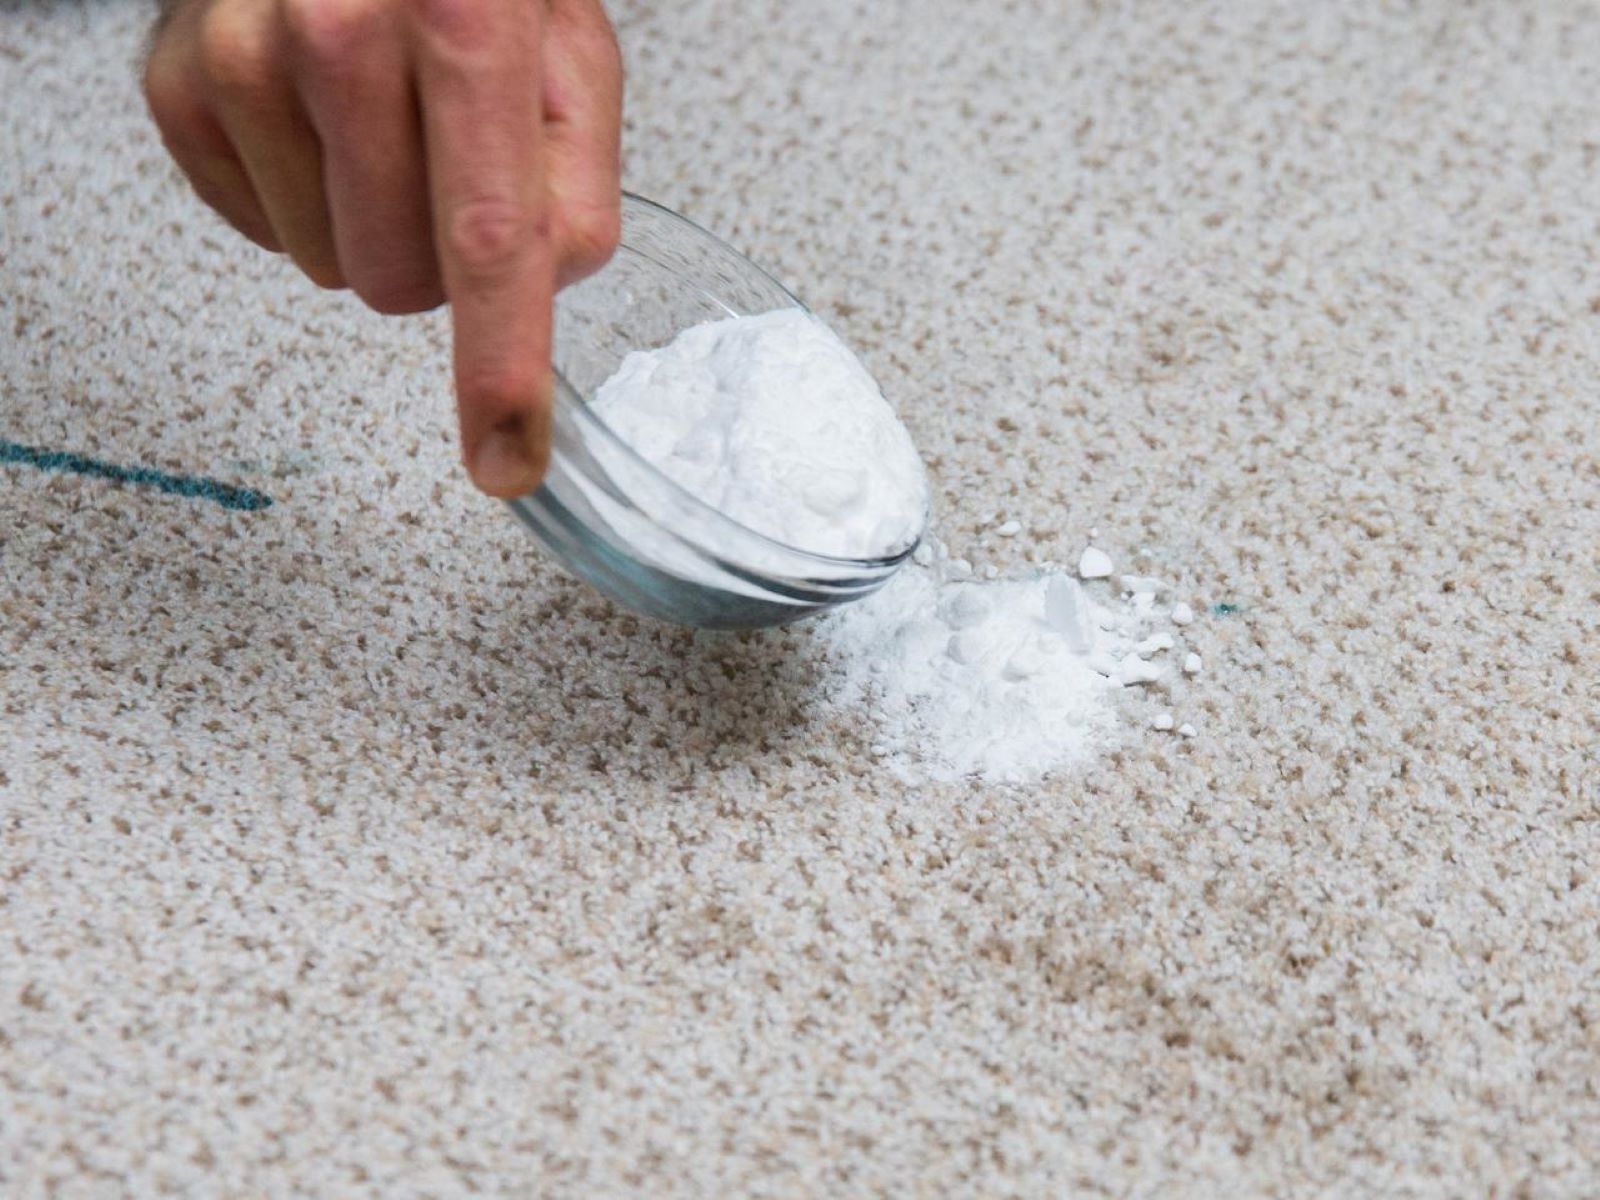 How To Remove Blood From Carpet With Baking Soda